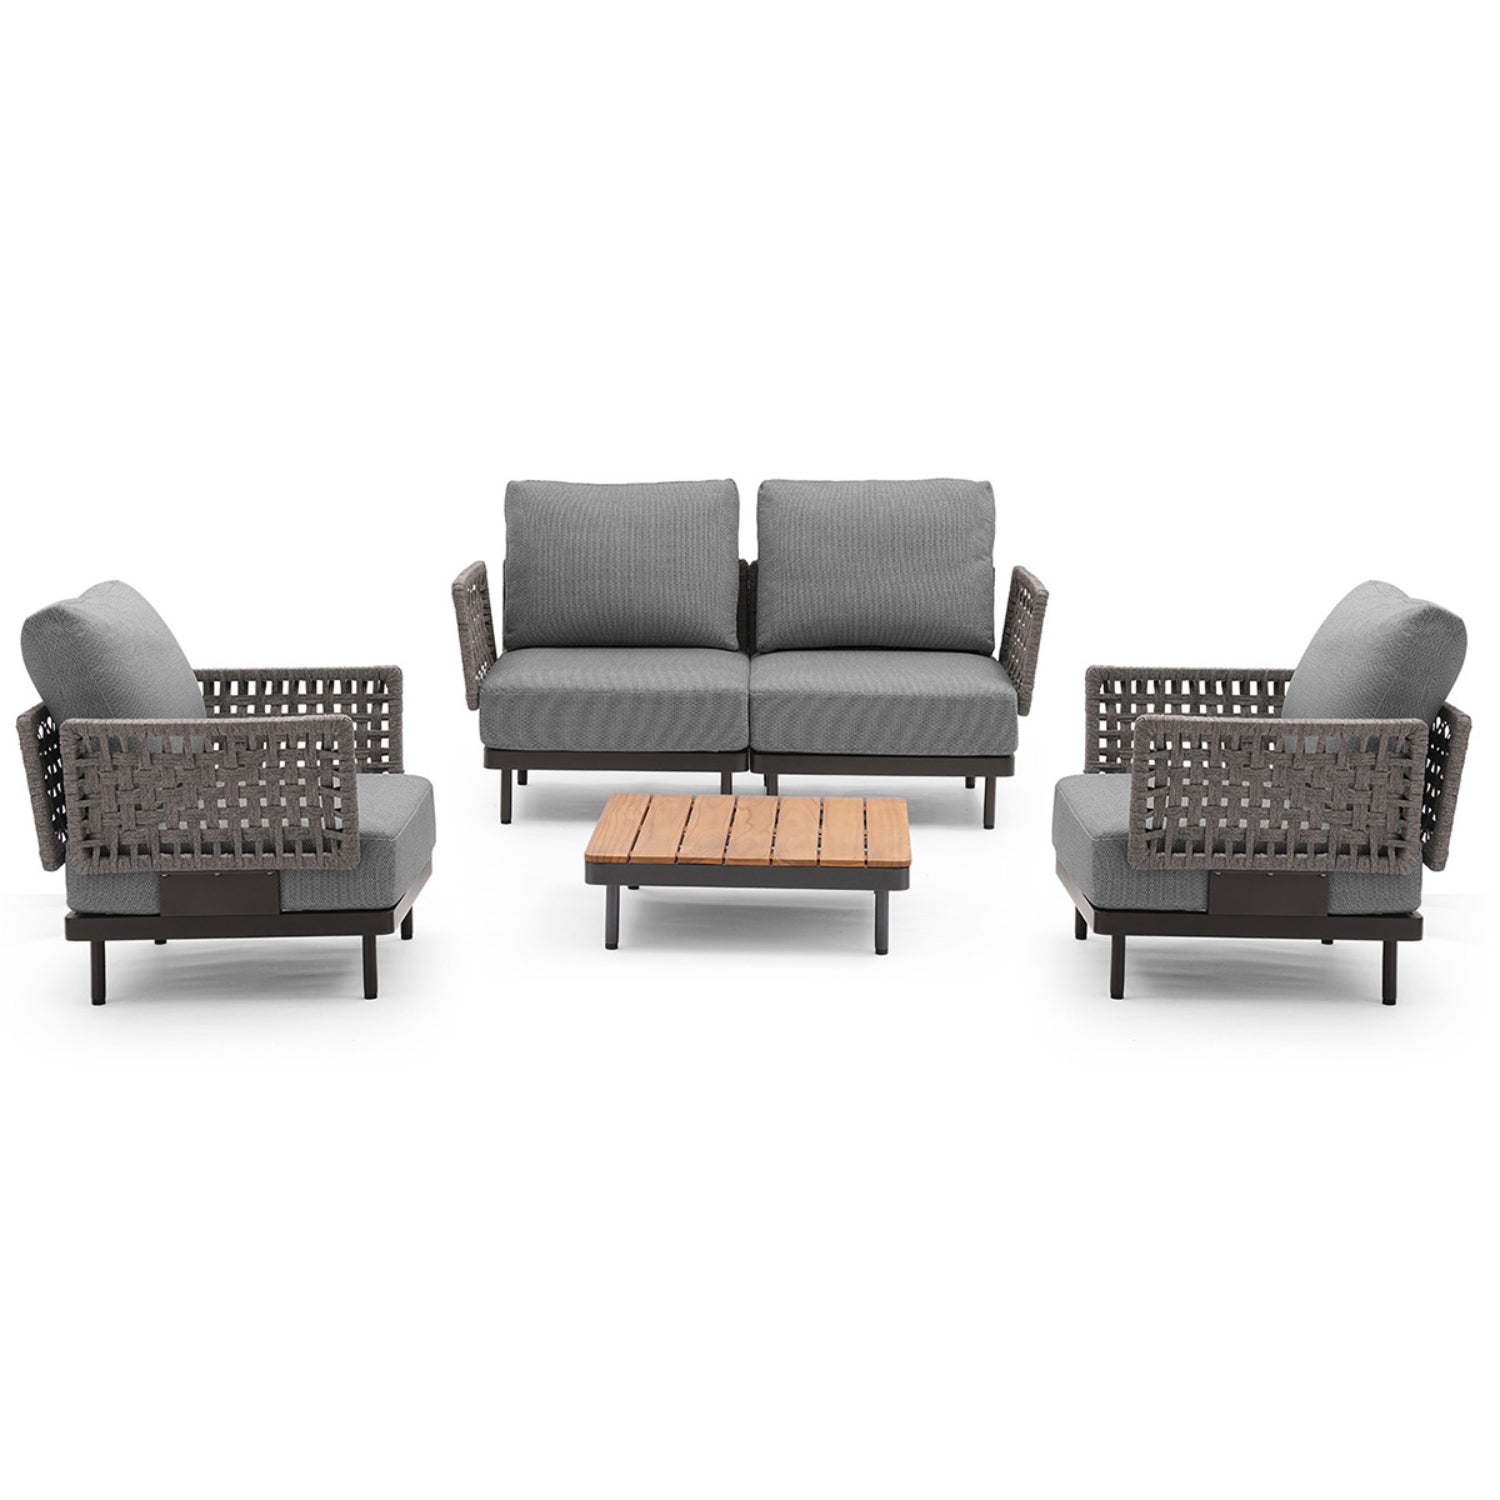 Patio Woven Rattan Sectional Couch Set